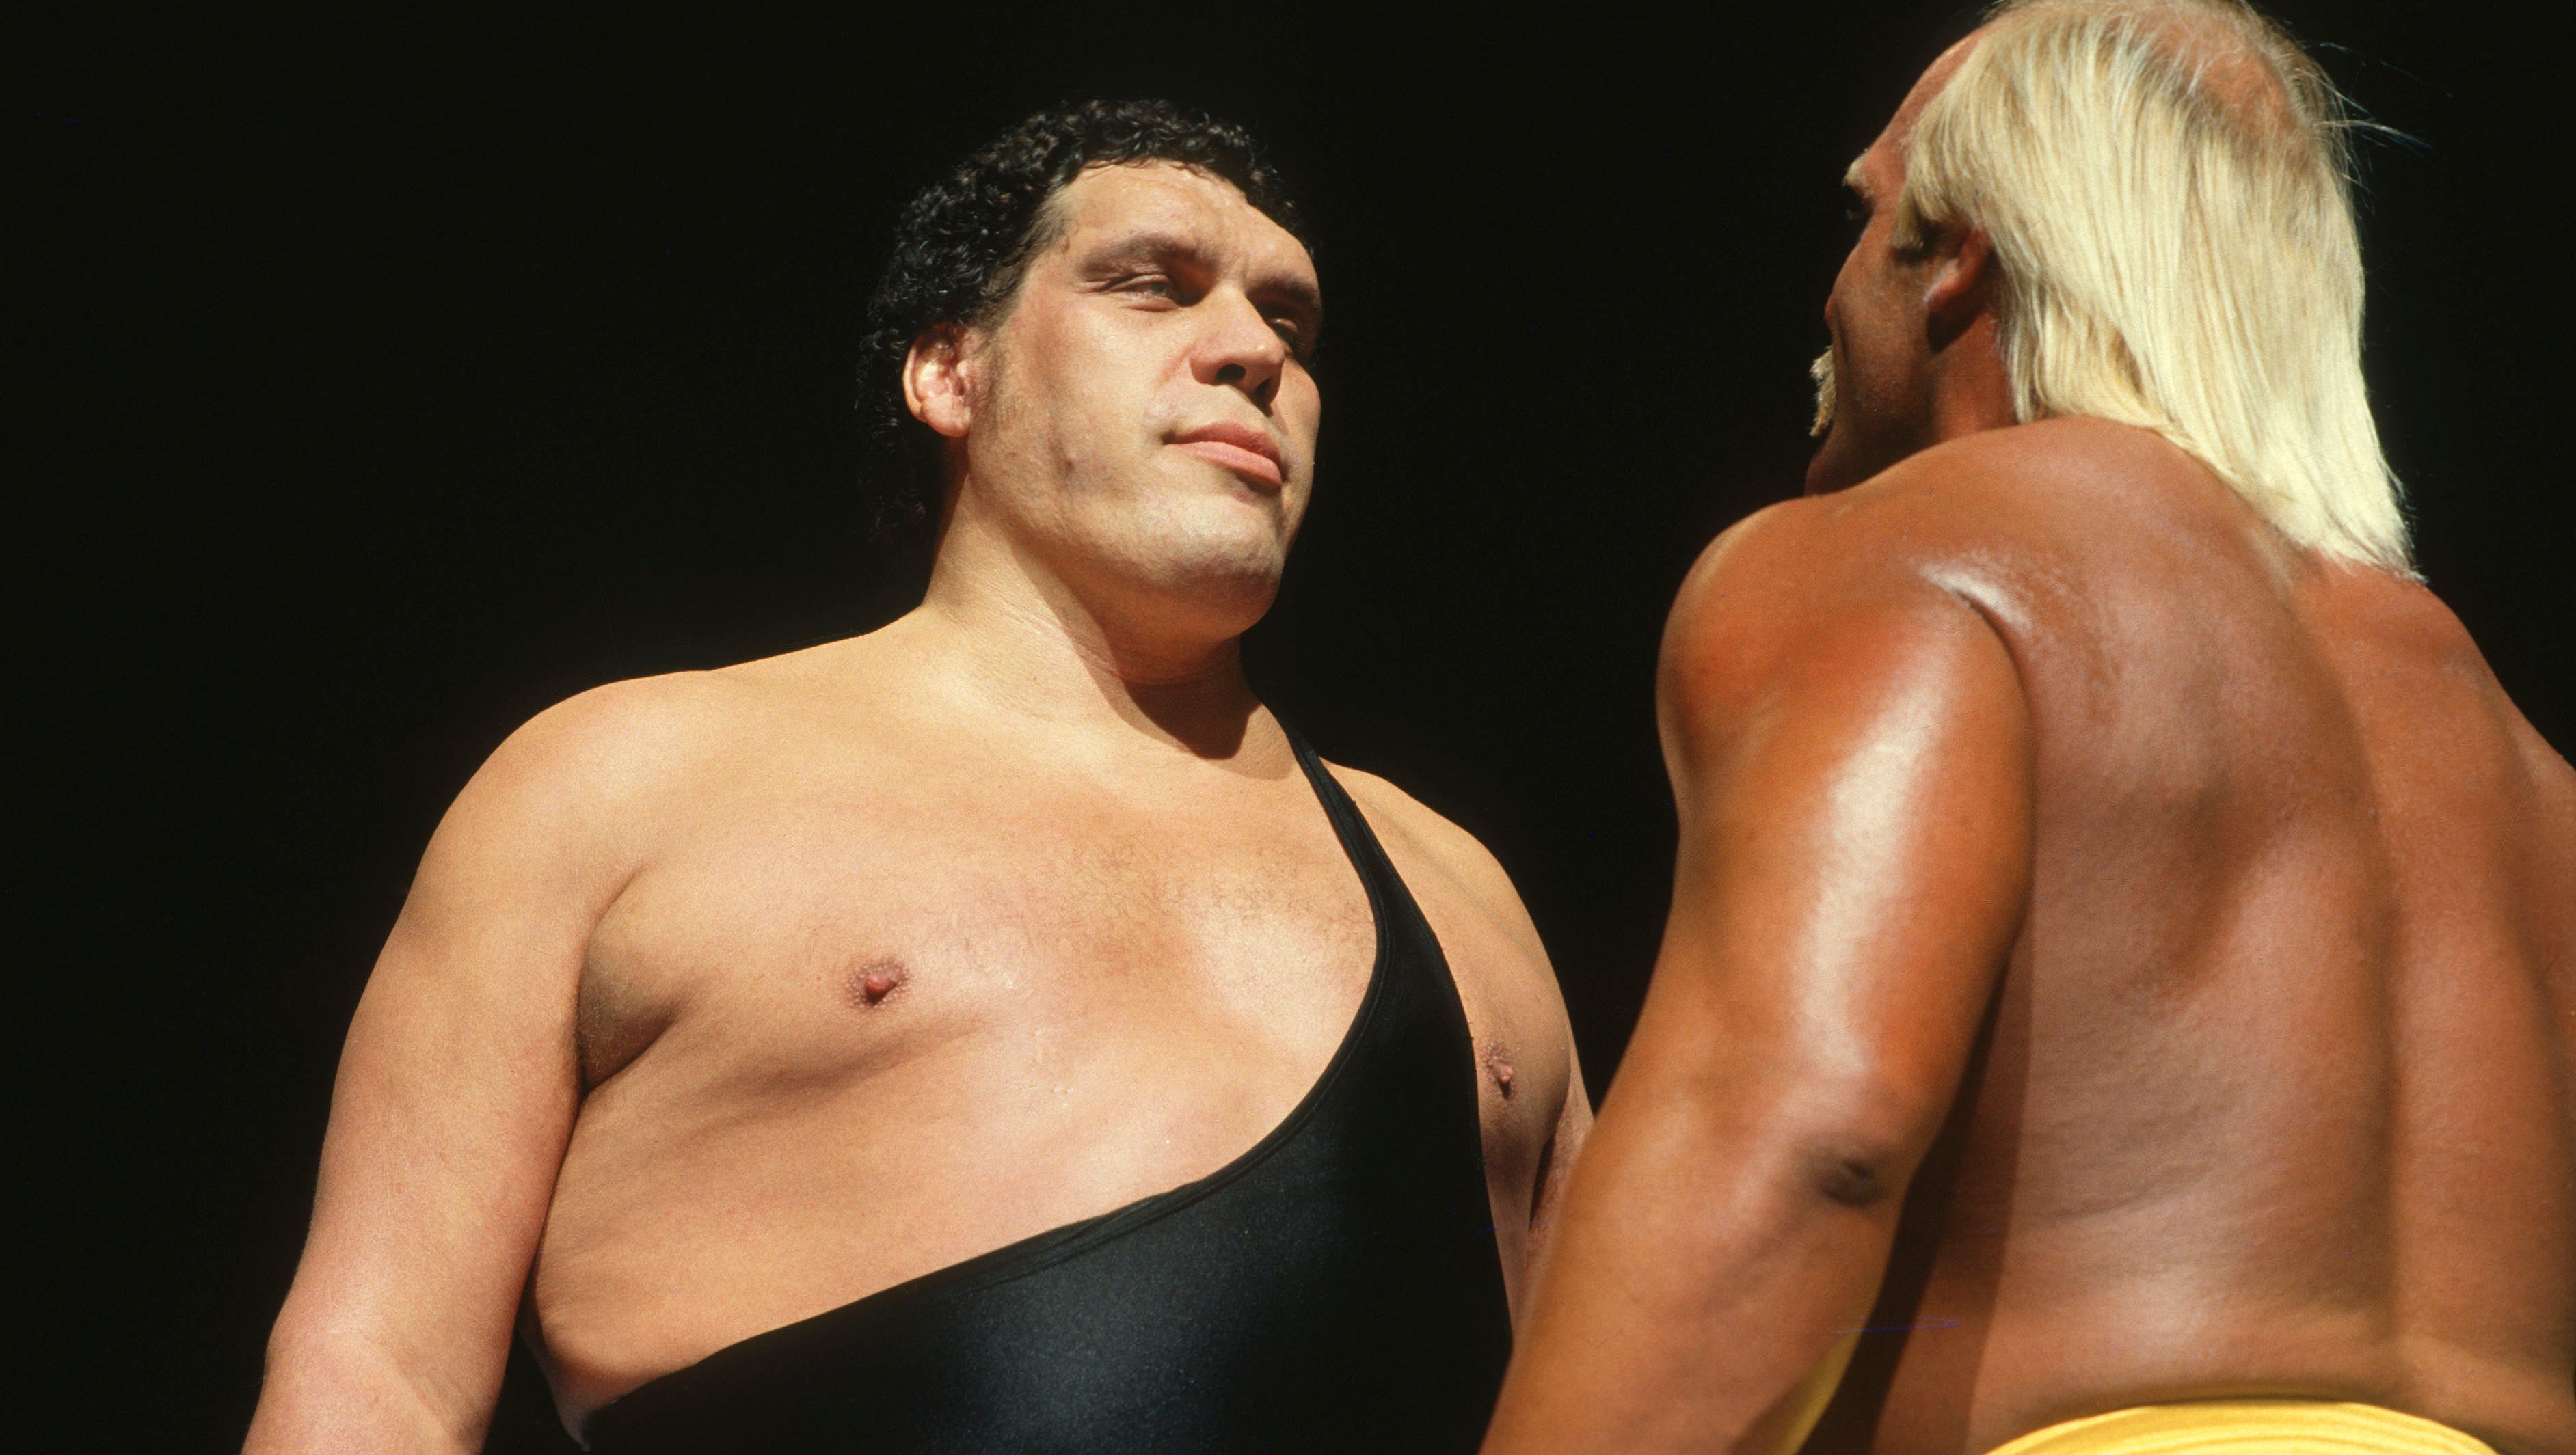 Andre the Giant and Hulk Hogan wrestled many times over the years, around the world, and were good friends. But the storyline for WrestleMania III pitted them as bitter rivals.